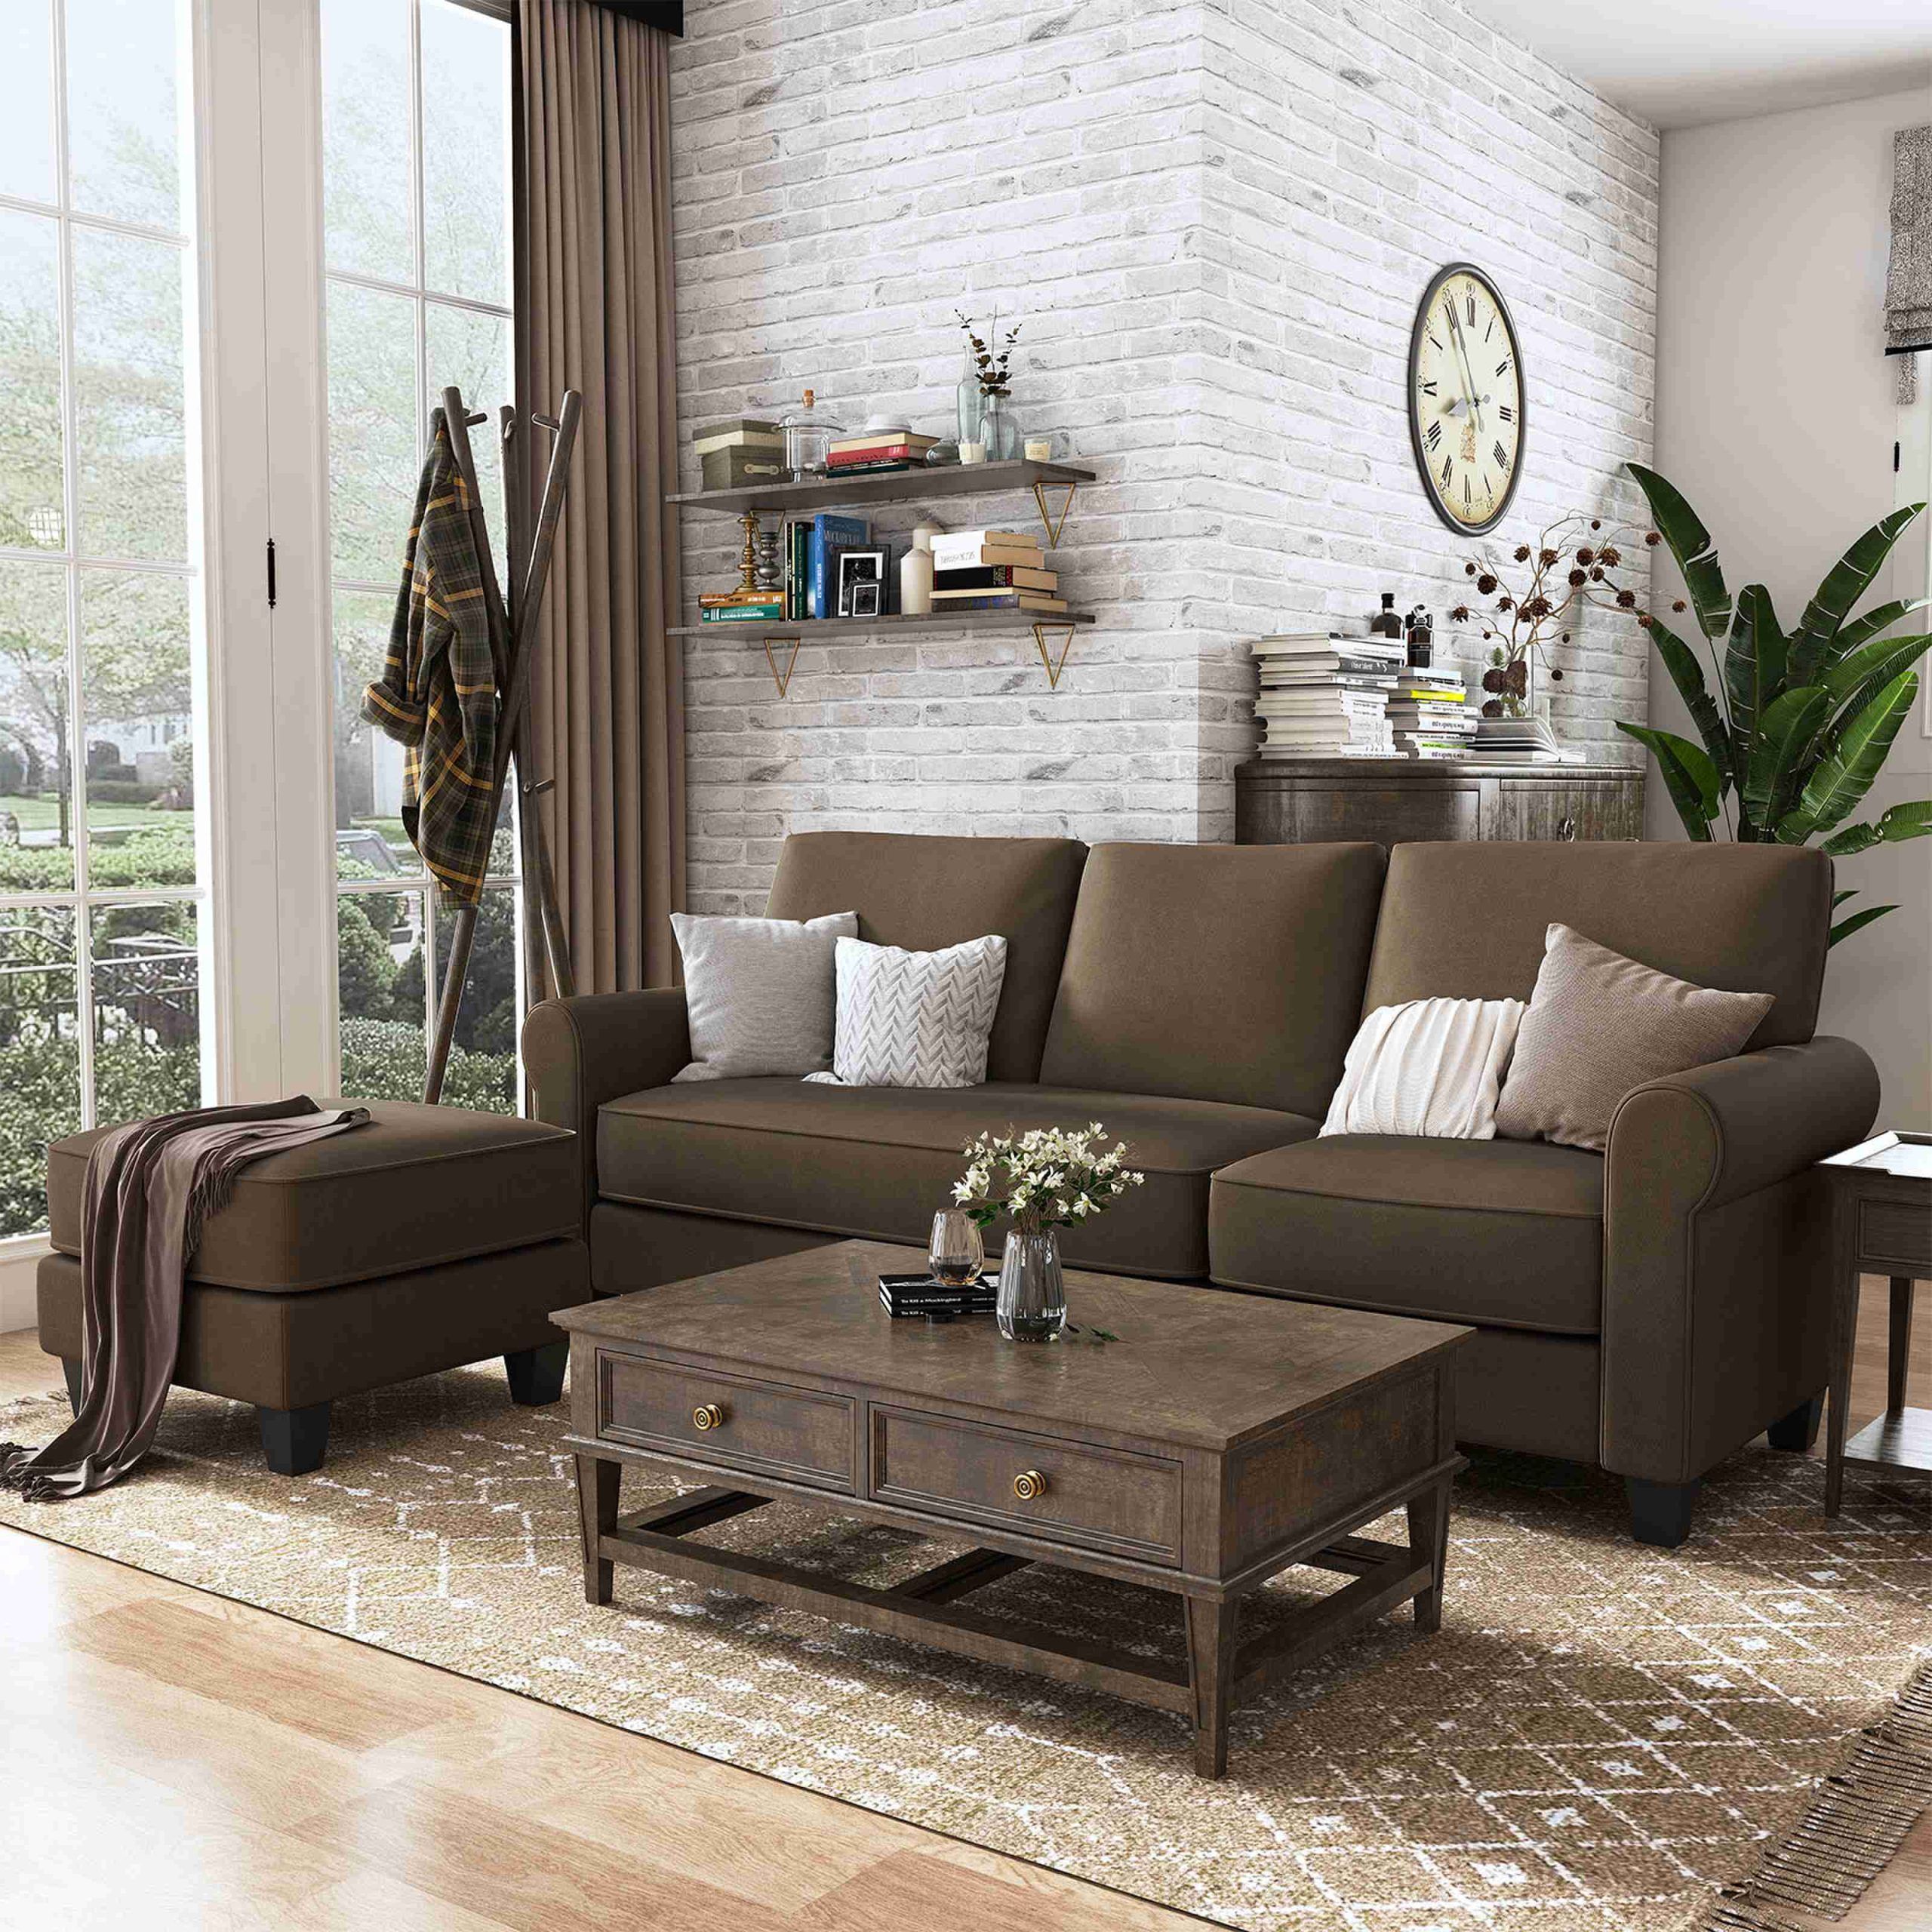 Nolany Convertible Sectional Sofa L Shaped Couch 3 Seat Sofa With Chaise, Chocolate  Brown – Walmart Inside Sofas In Chocolate Brown (Photo 3 of 15)